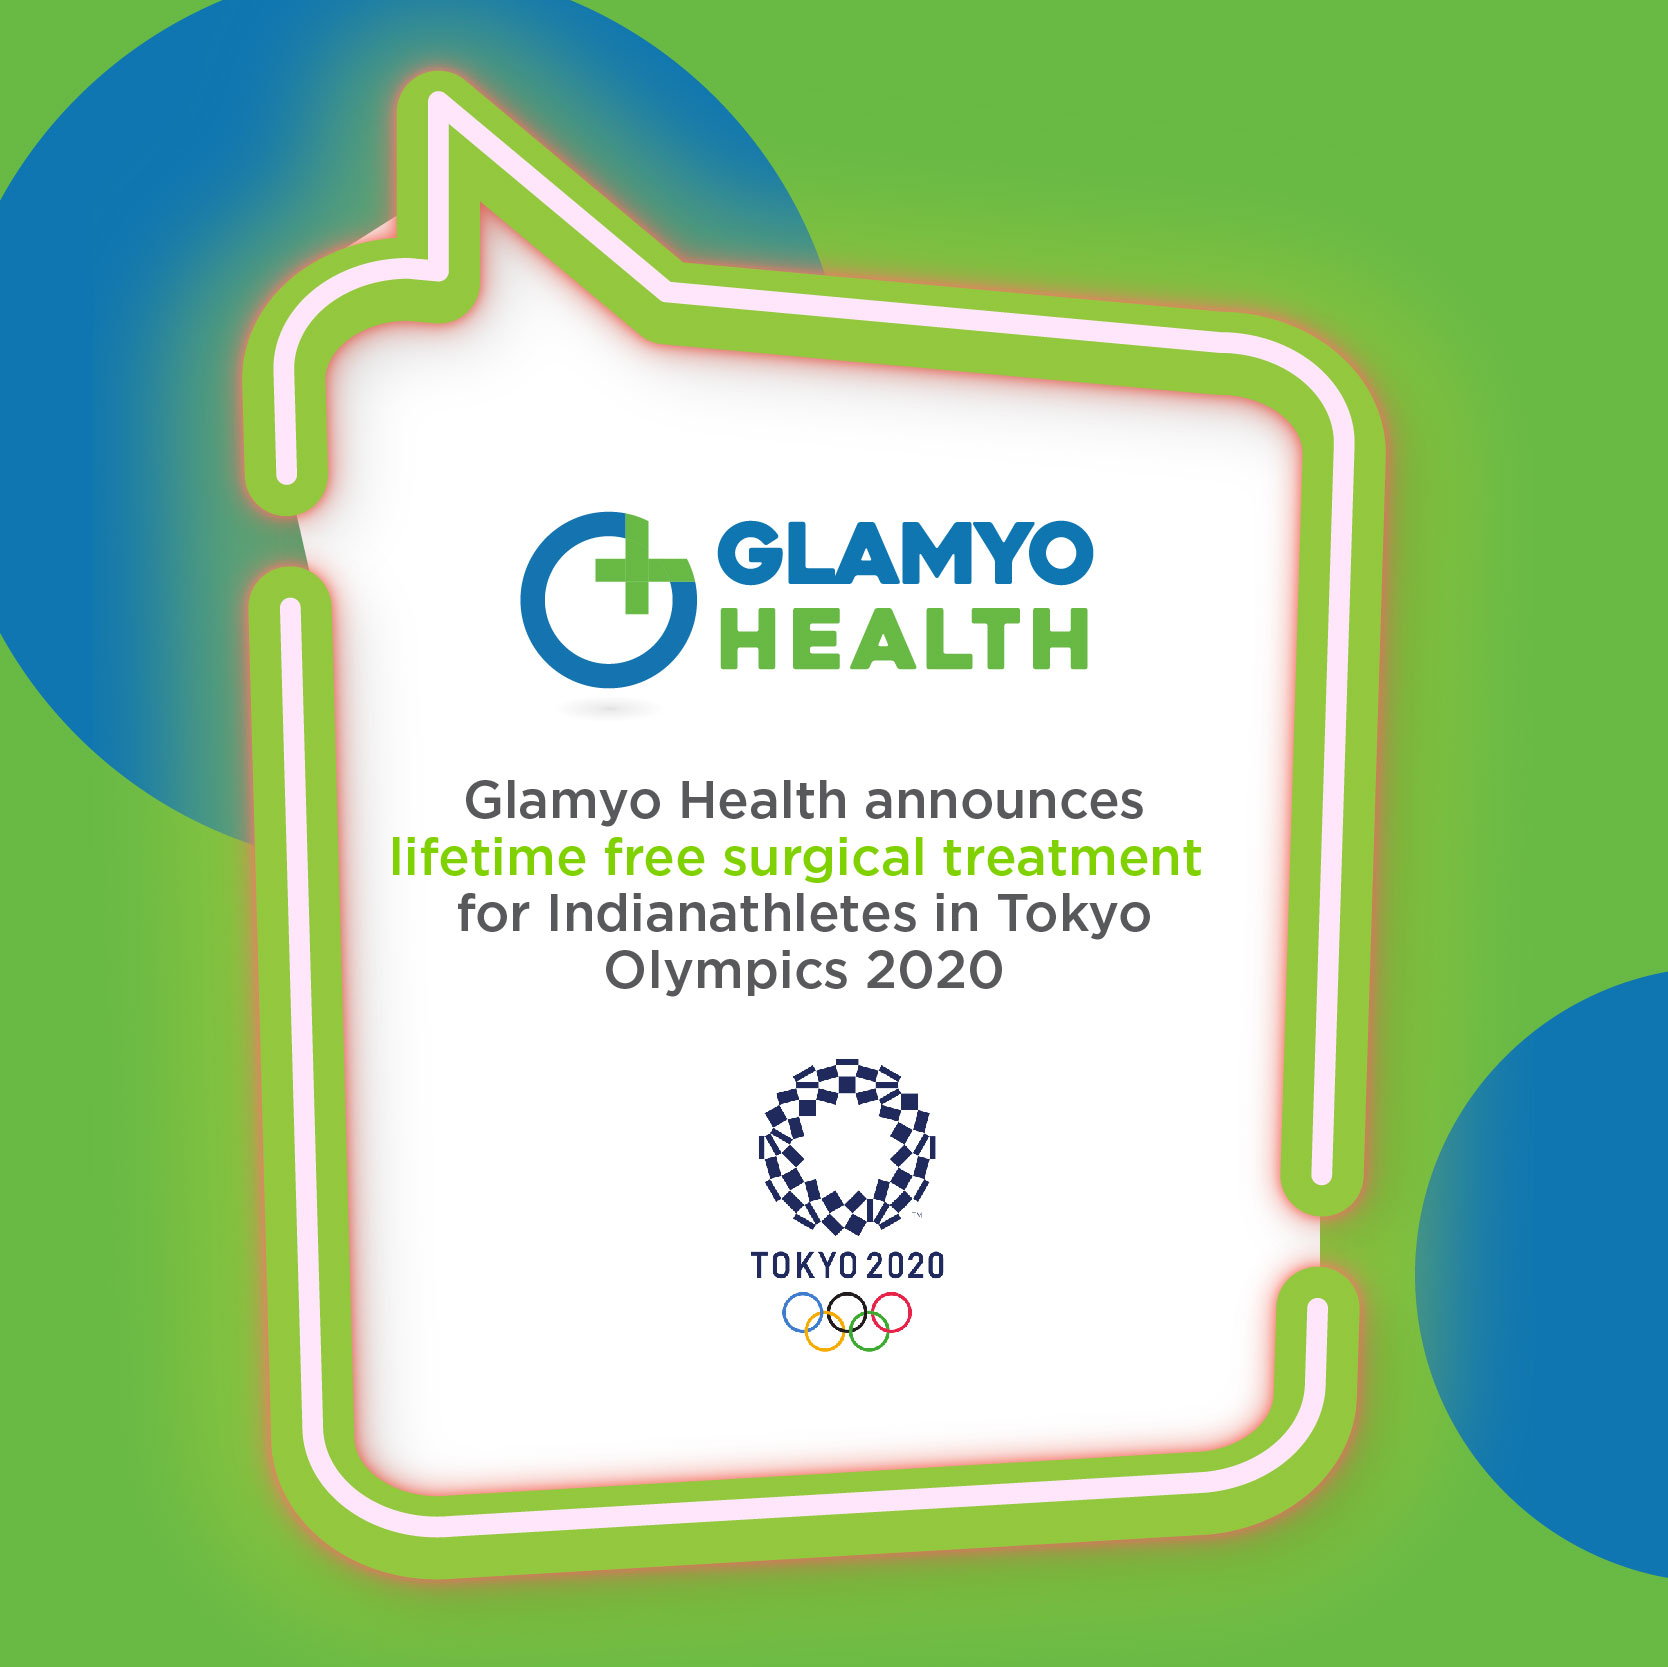 HealthTech Startup Glamyo Health announces lifetime free surgical treatment for Indian athletes in Tokyo Olympics 2020-thumnail